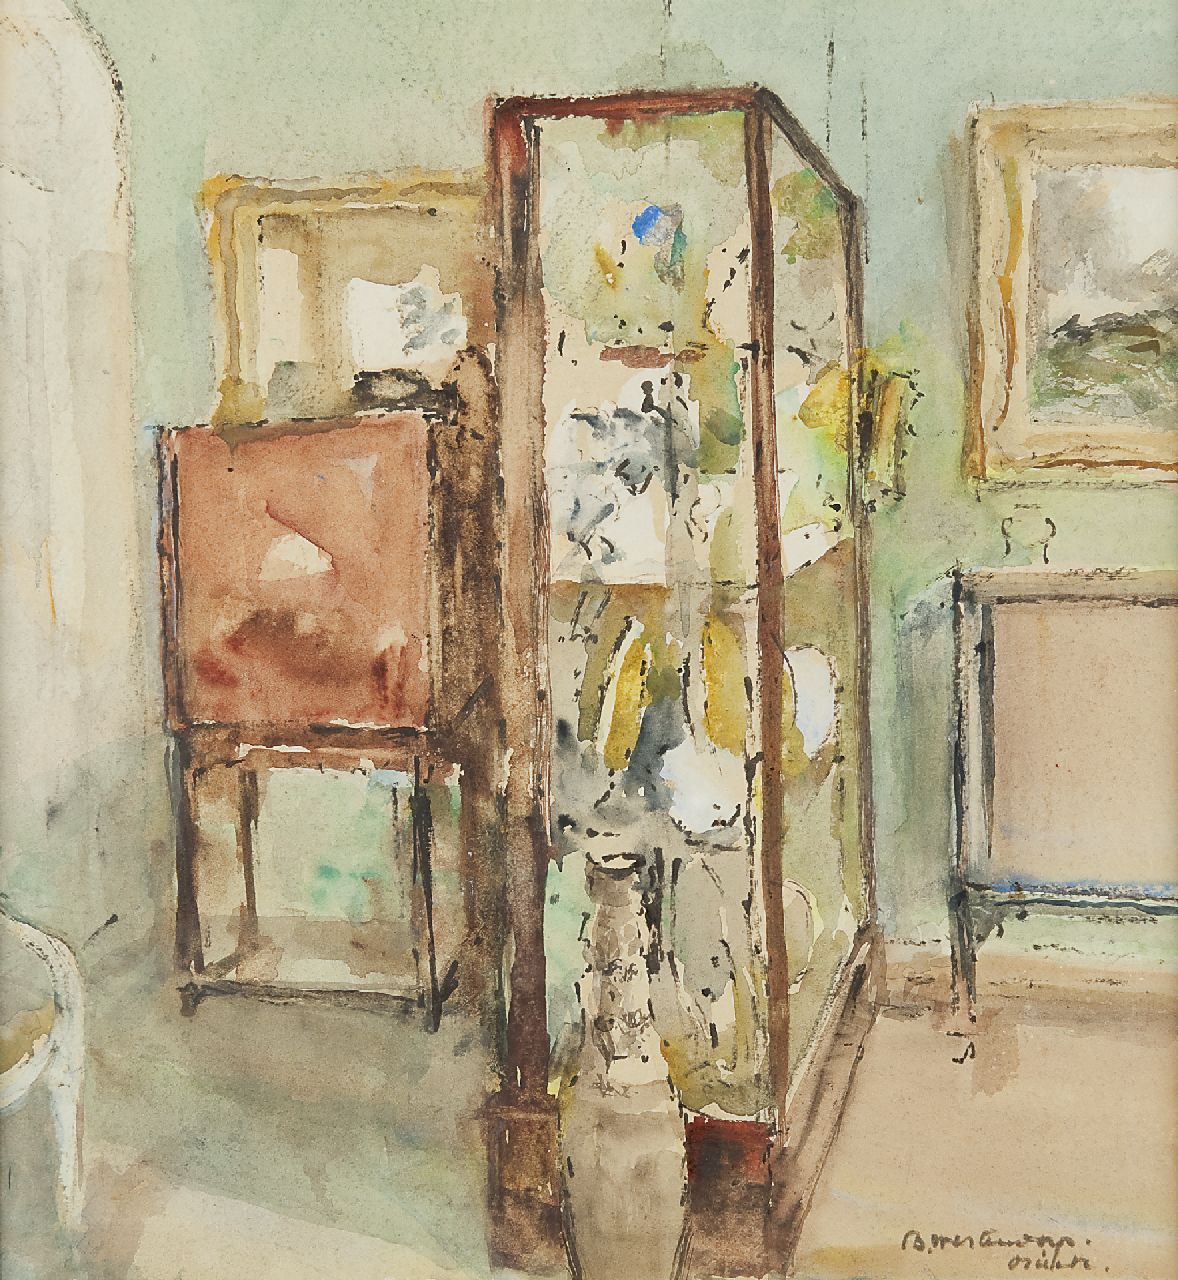 Westendorp-Osieck J.E.  | Johanna Elisabeth 'Betsy' Westendorp-Osieck | Watercolours and drawings offered for sale | Interior with a showcase, watercolour on paper 32.0 x 30.0 cm, signed l.r.